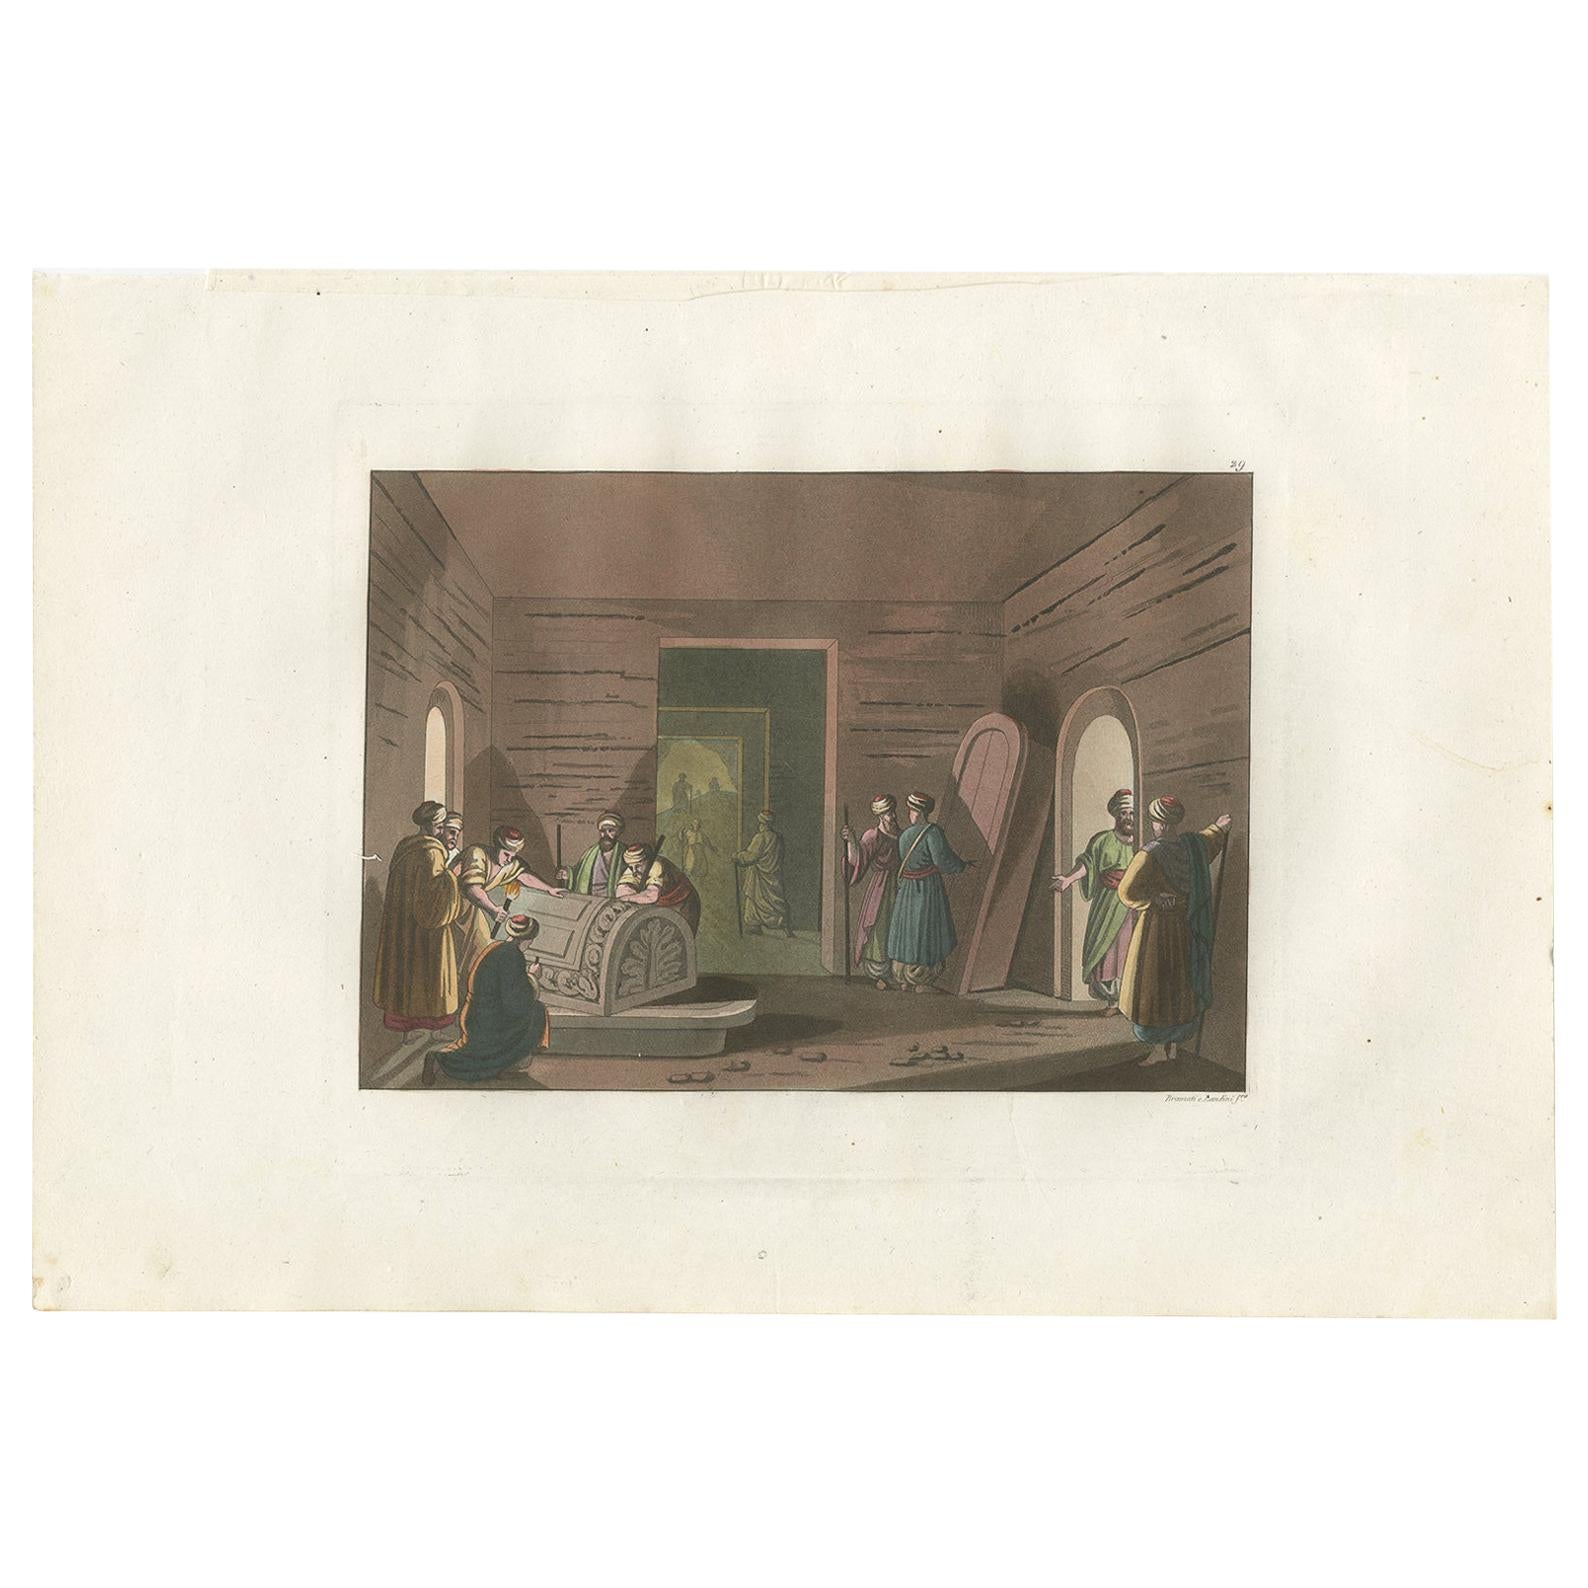 Antique Print of the Tombs of the Kings of Judah by Ferrario '1831'